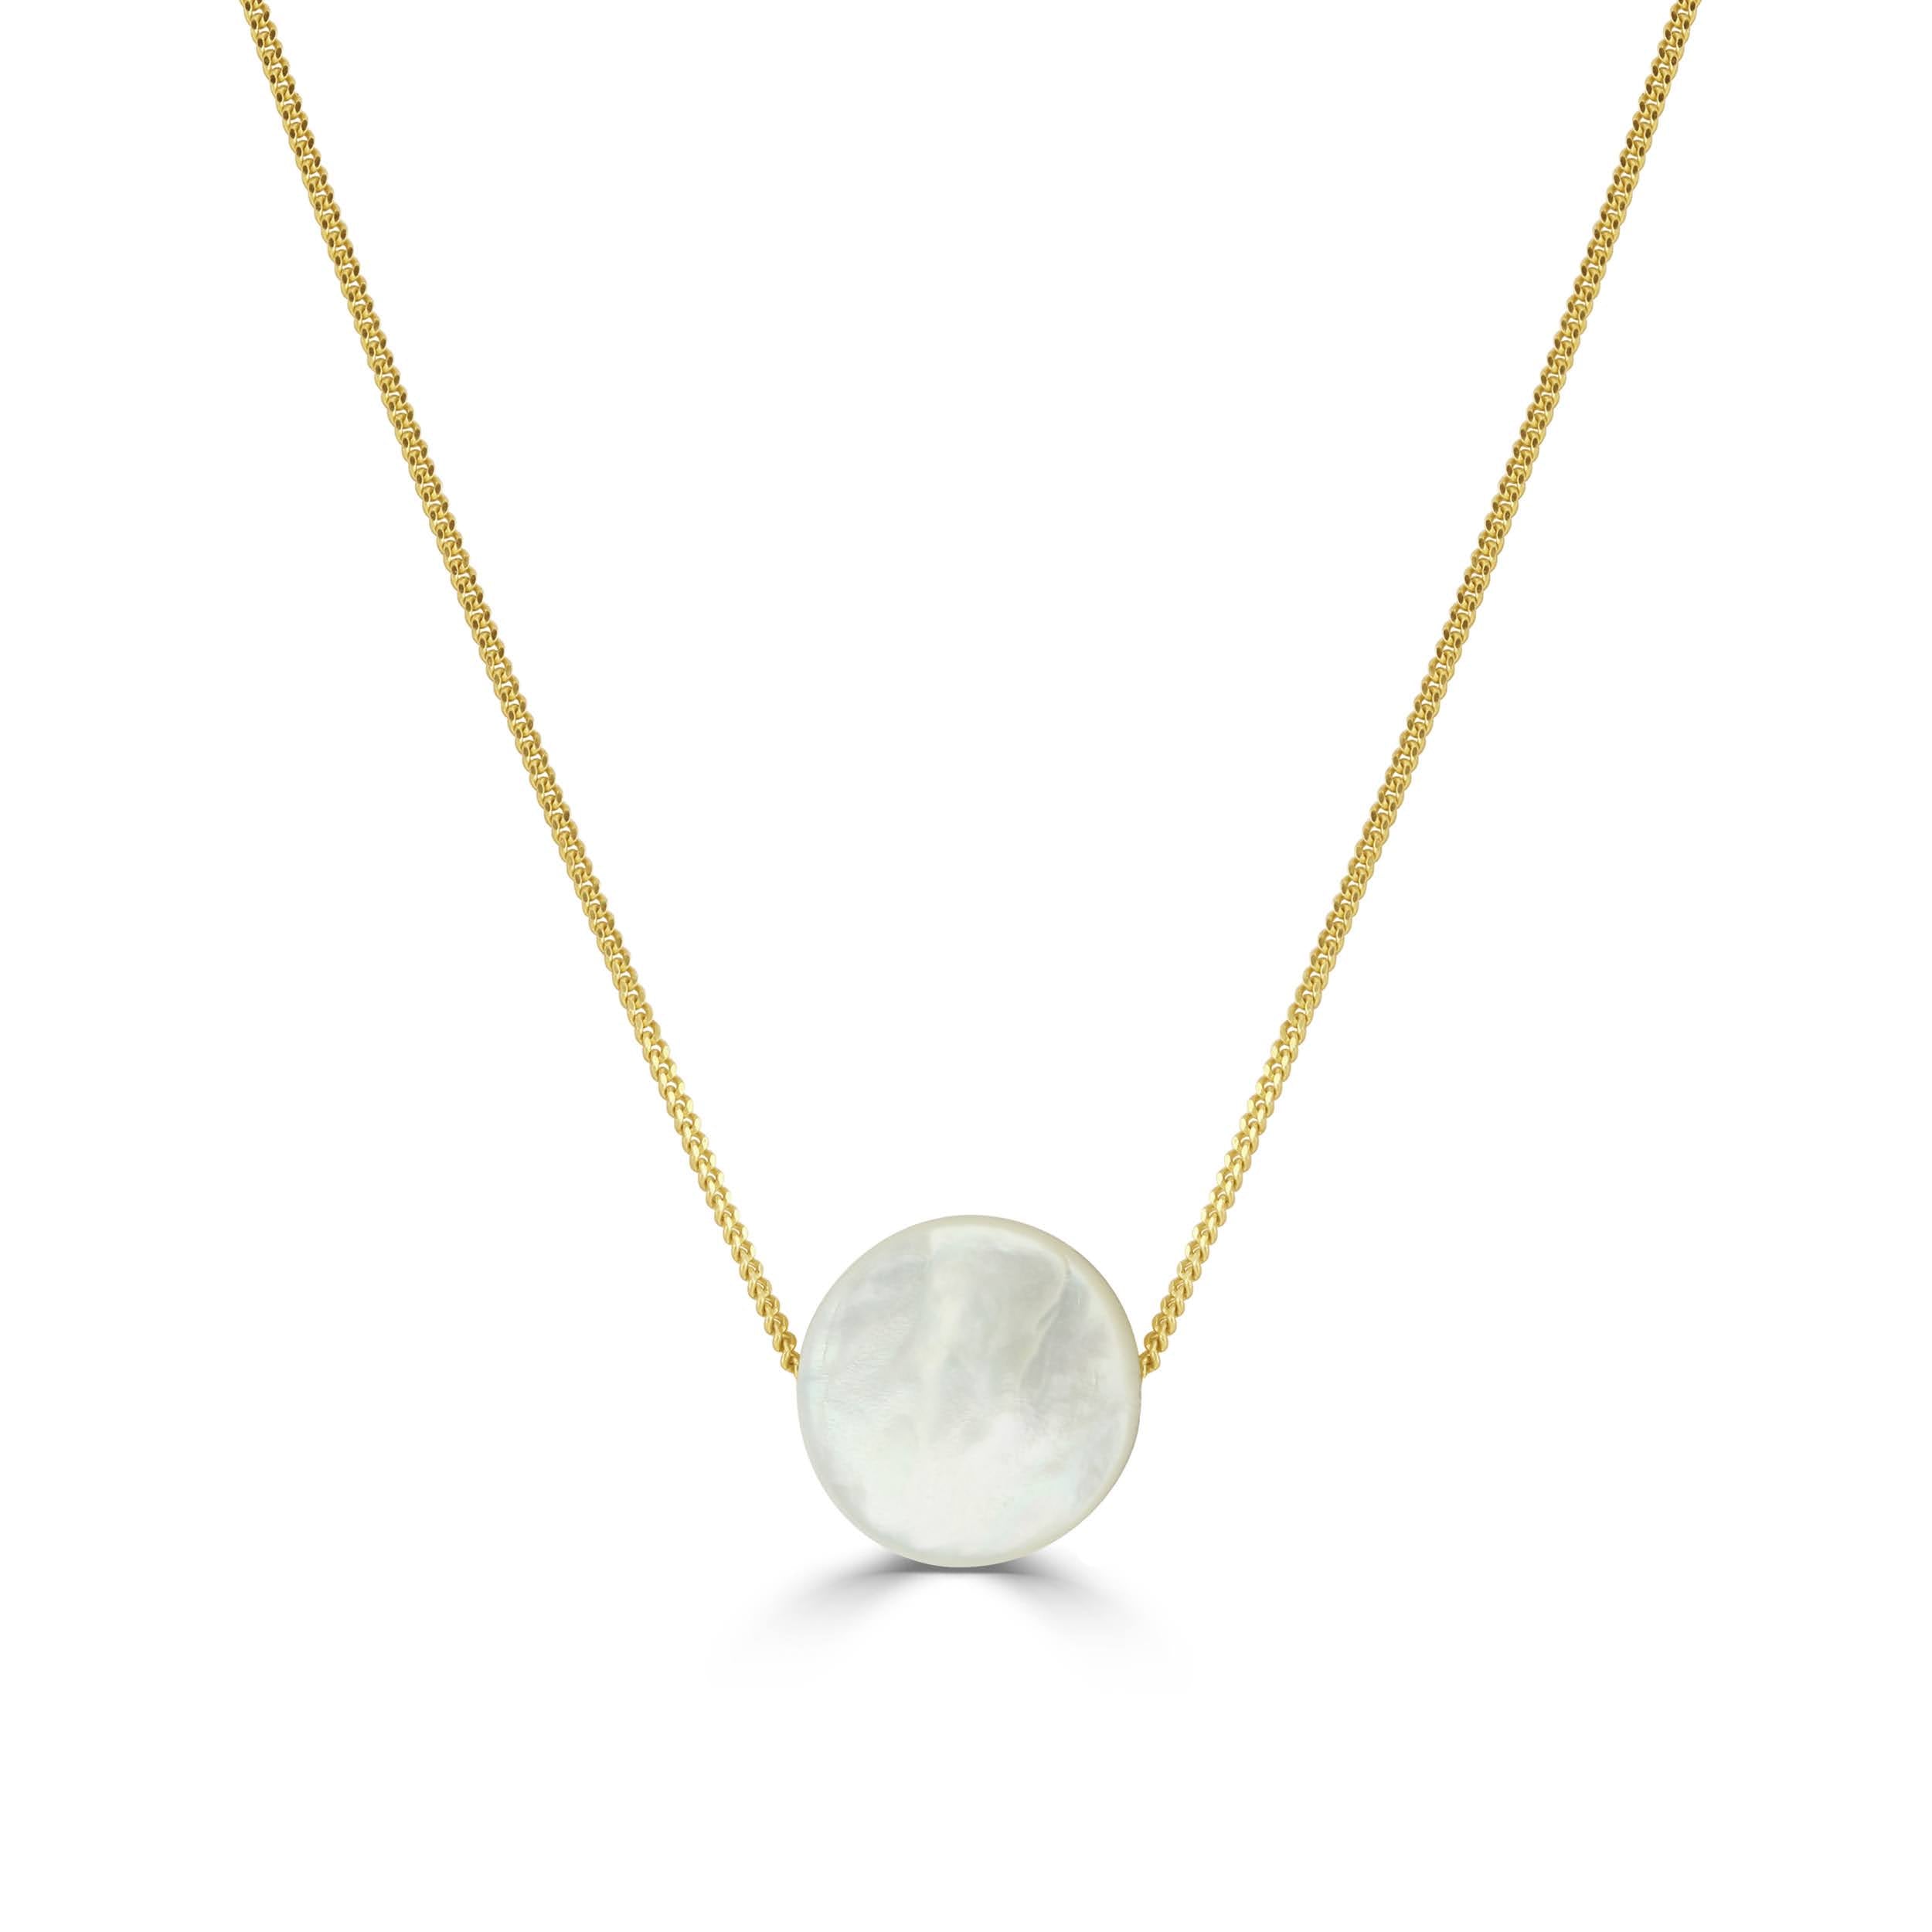 Mother of pearl full moon necklace